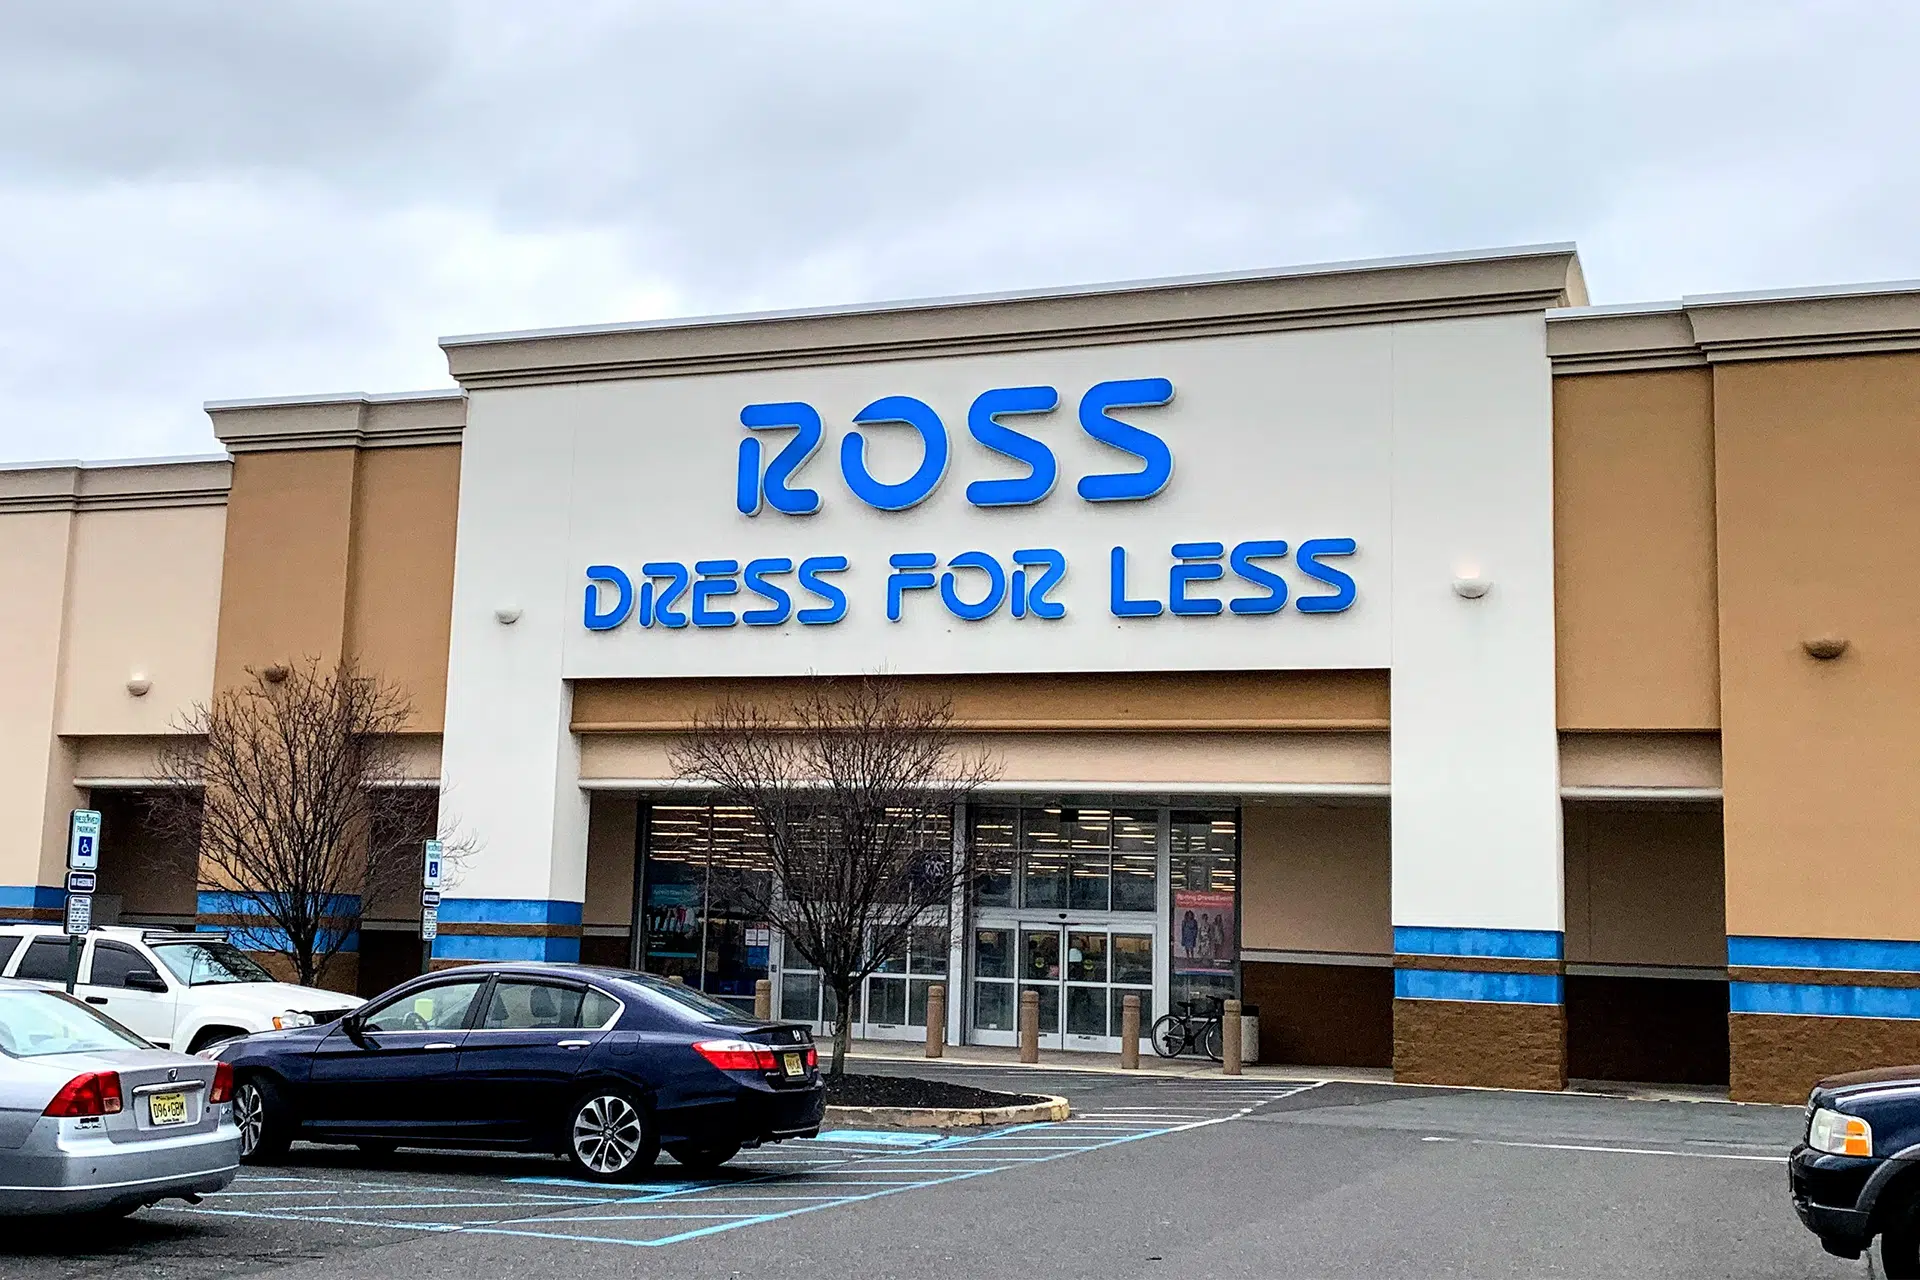 Ross Stores Plans 100 Openings in 2023 as it Pursues Goal of 3,500